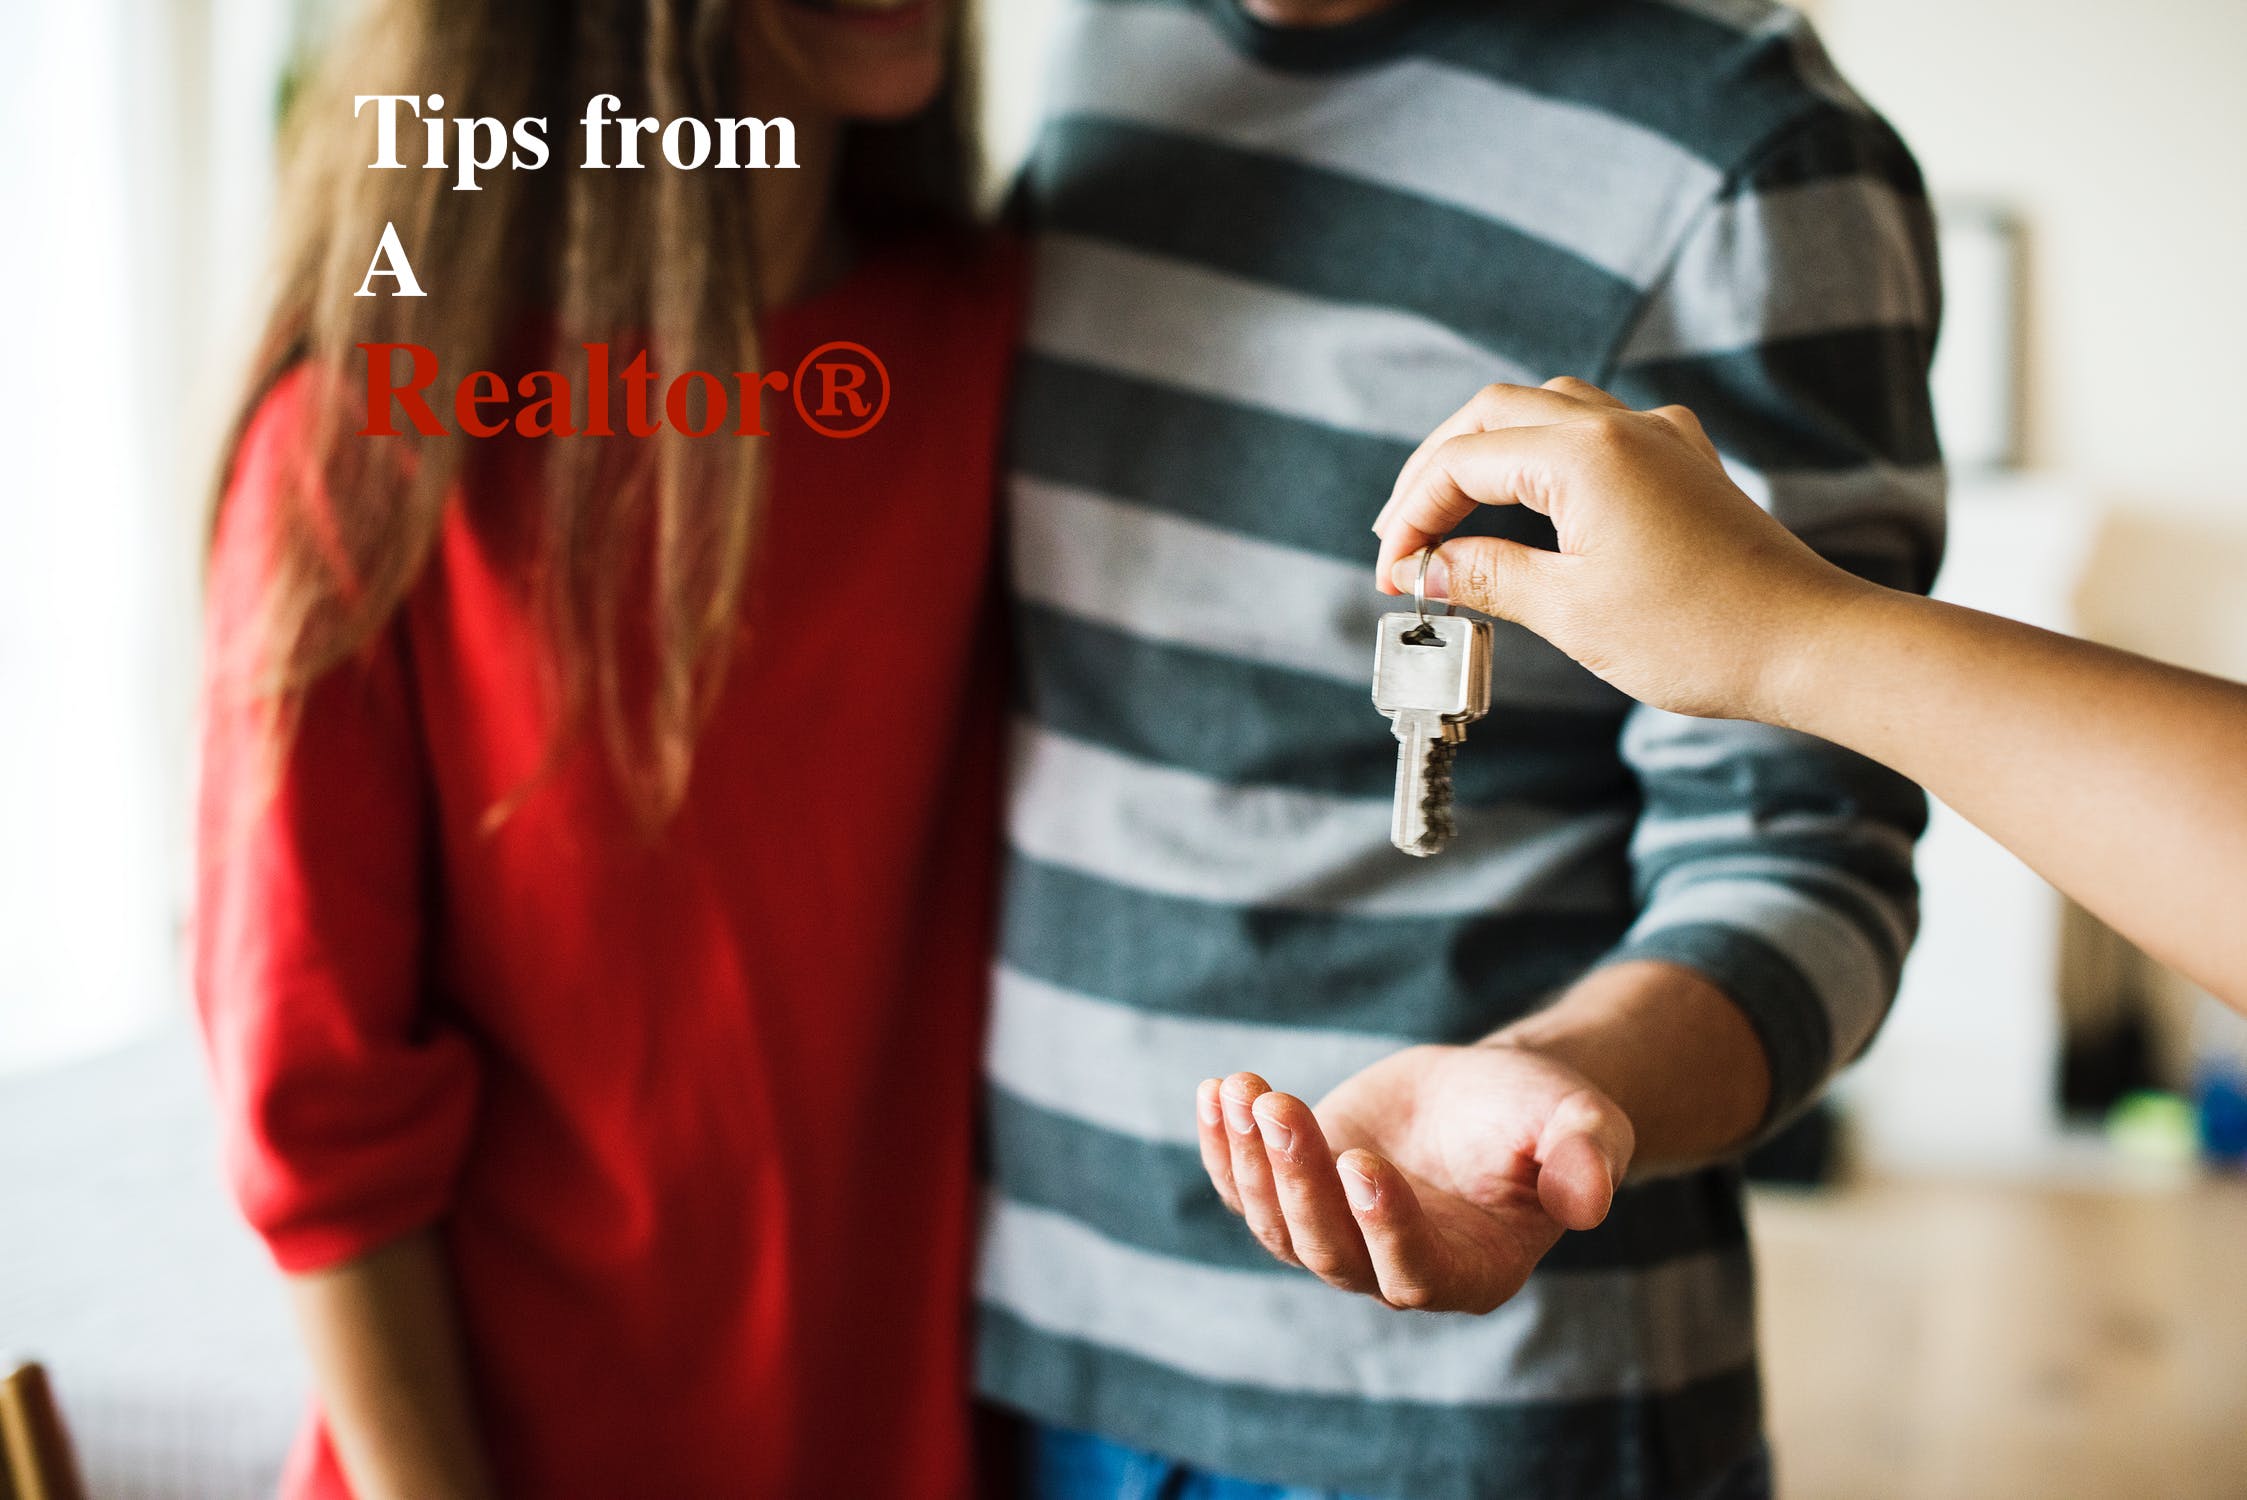 Tips from a Realtor® – Cameron Mabe